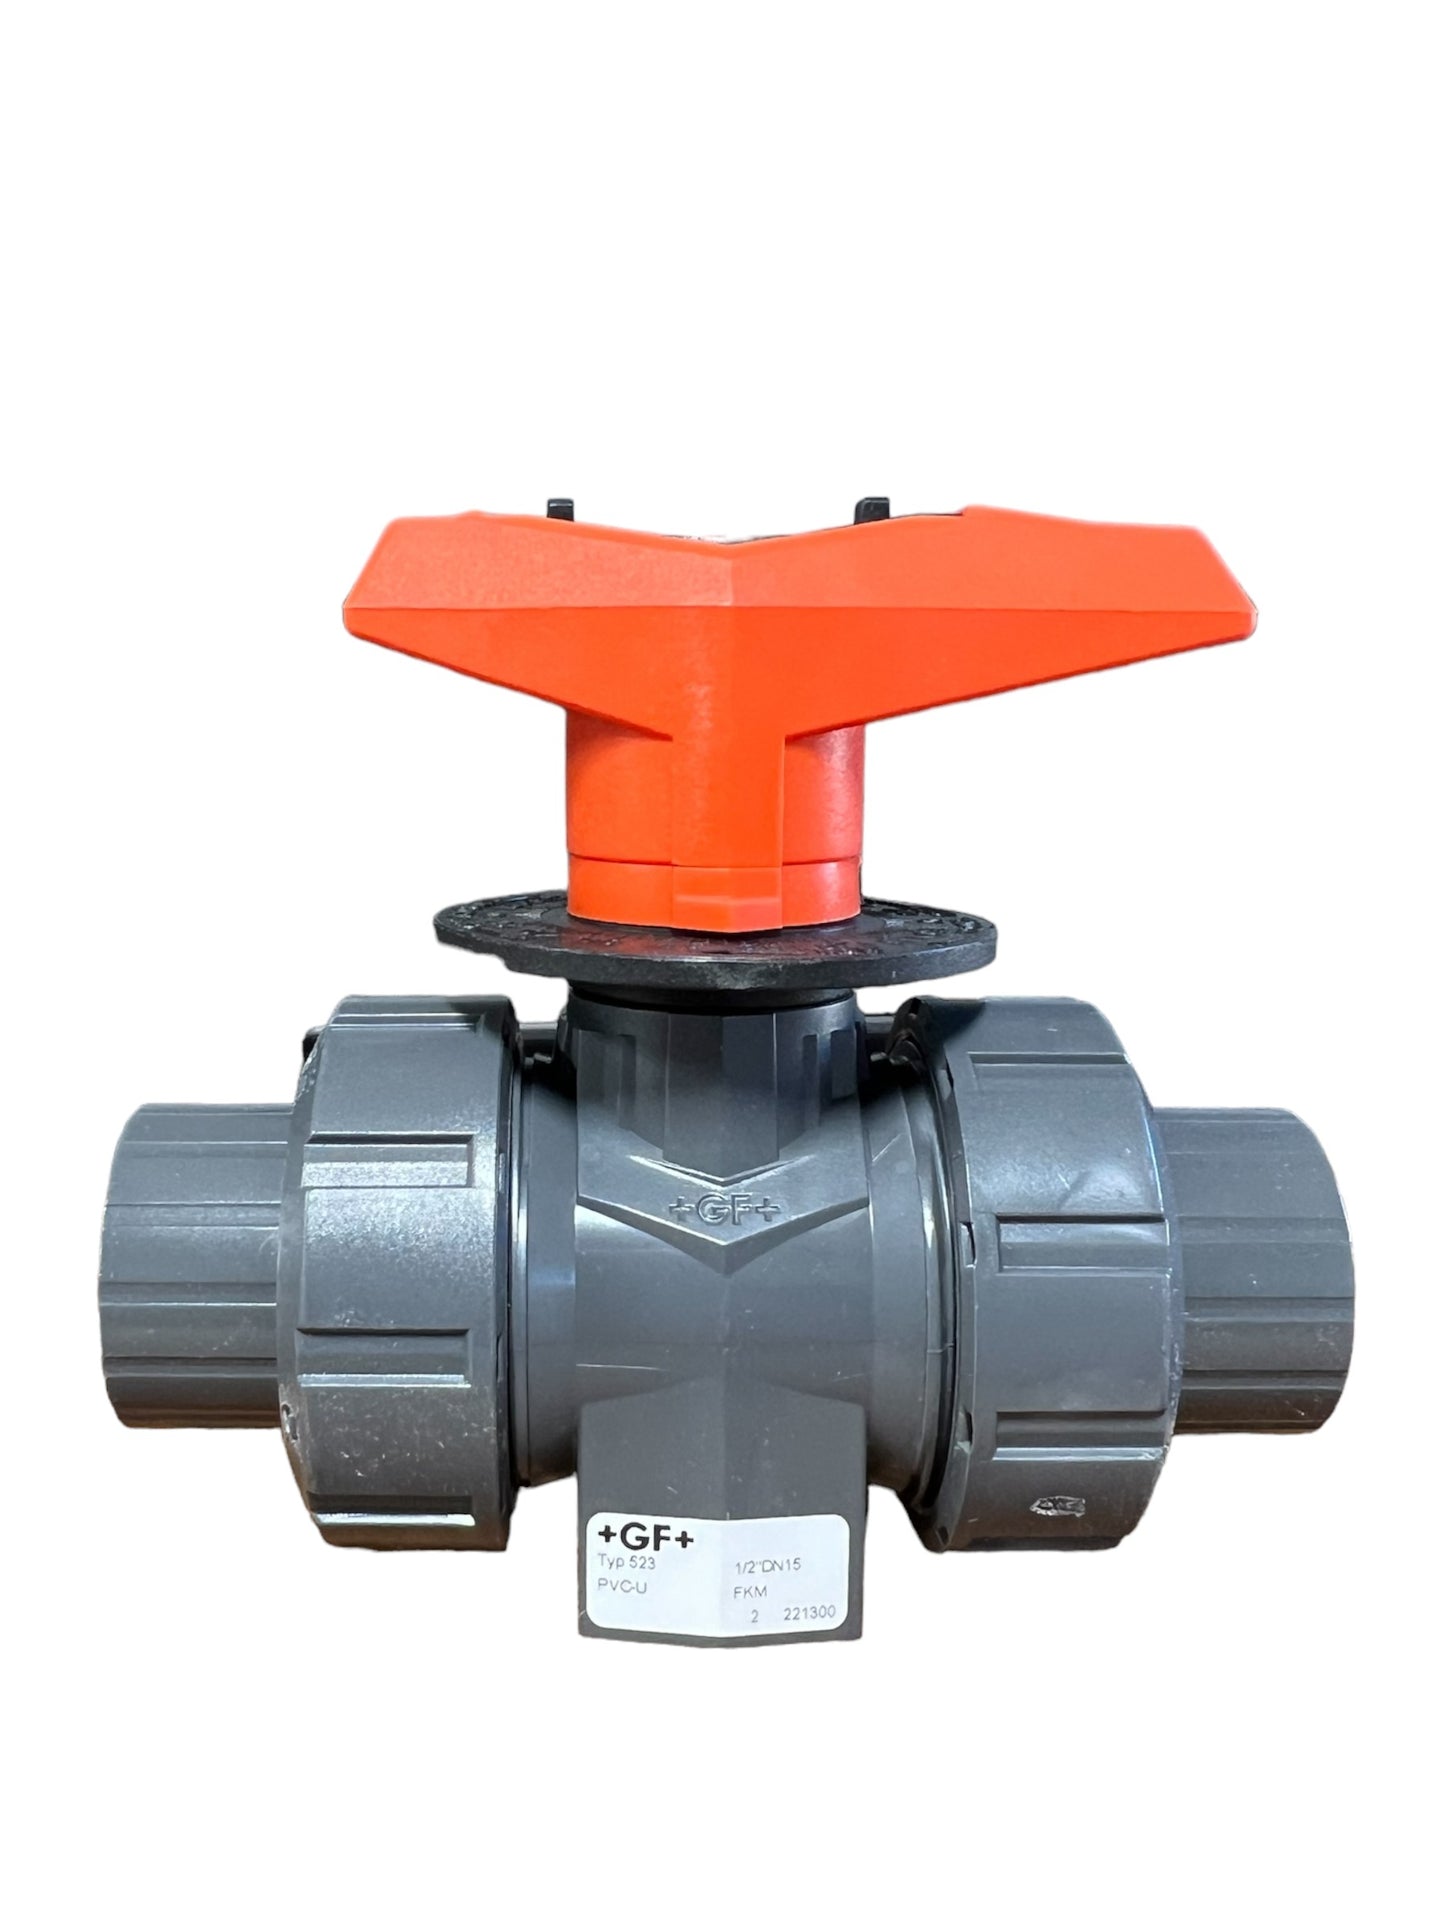 GF 1/2" Metering Ball Valves for Soft Wash Manifolds